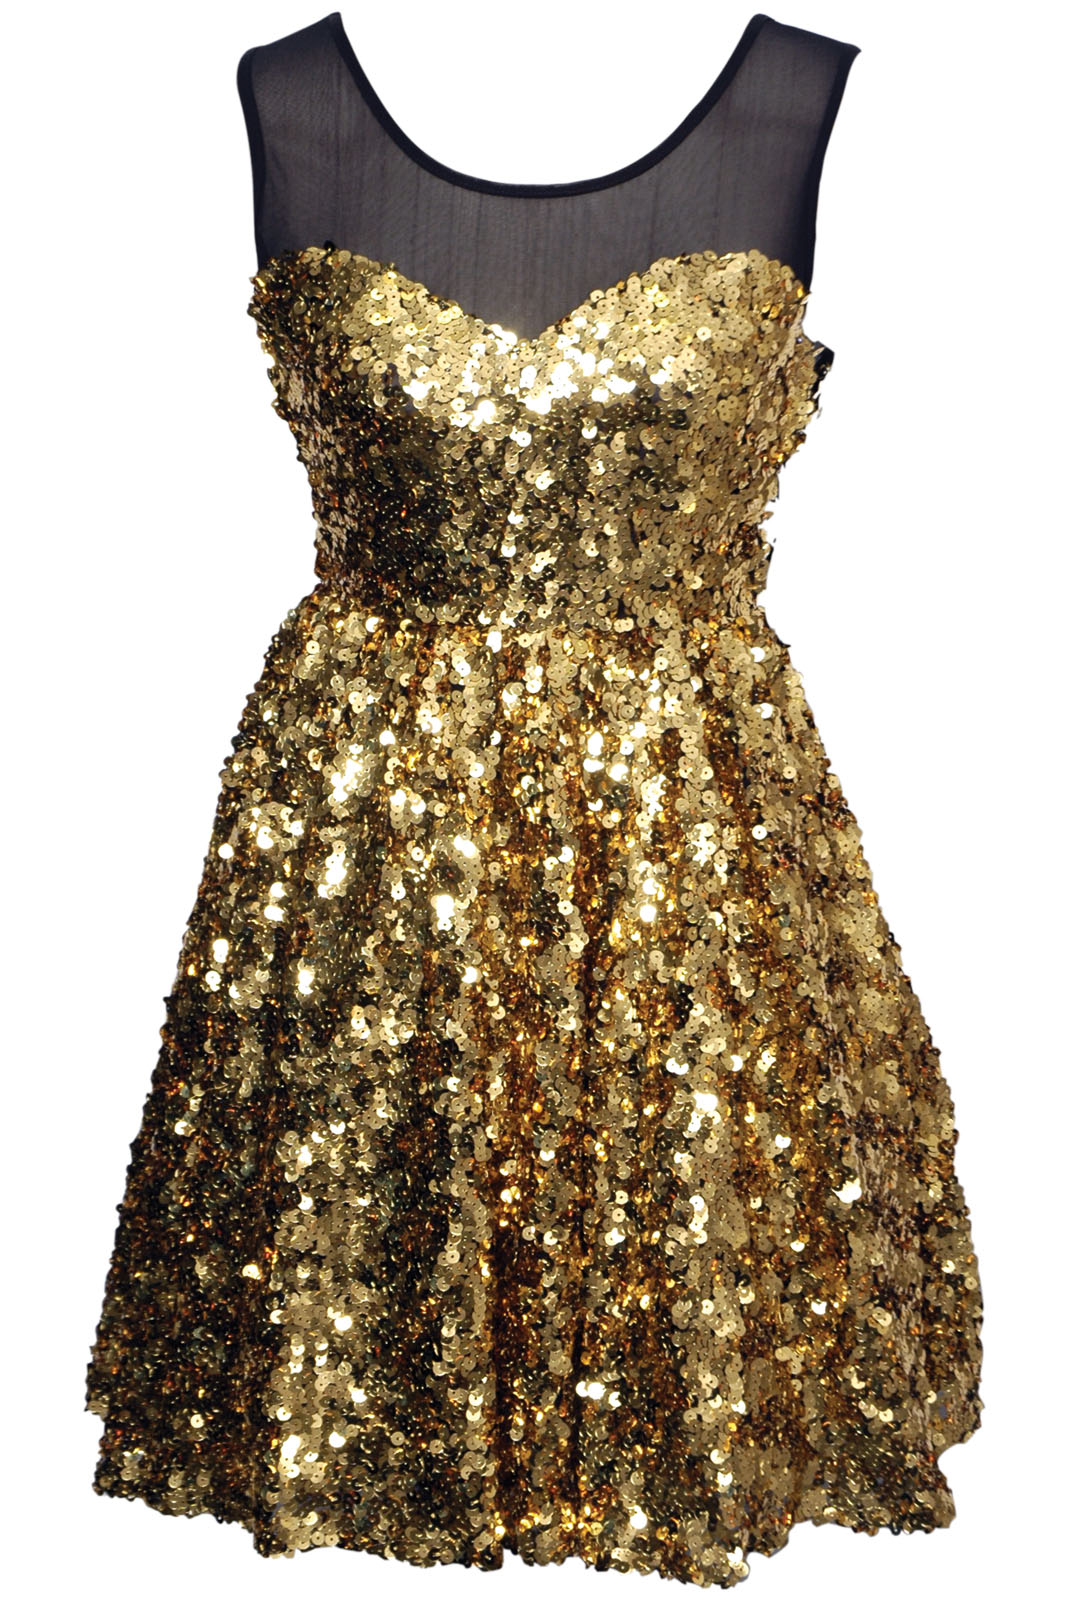 Sparkle Glitter Dress - Make Your Evening Special